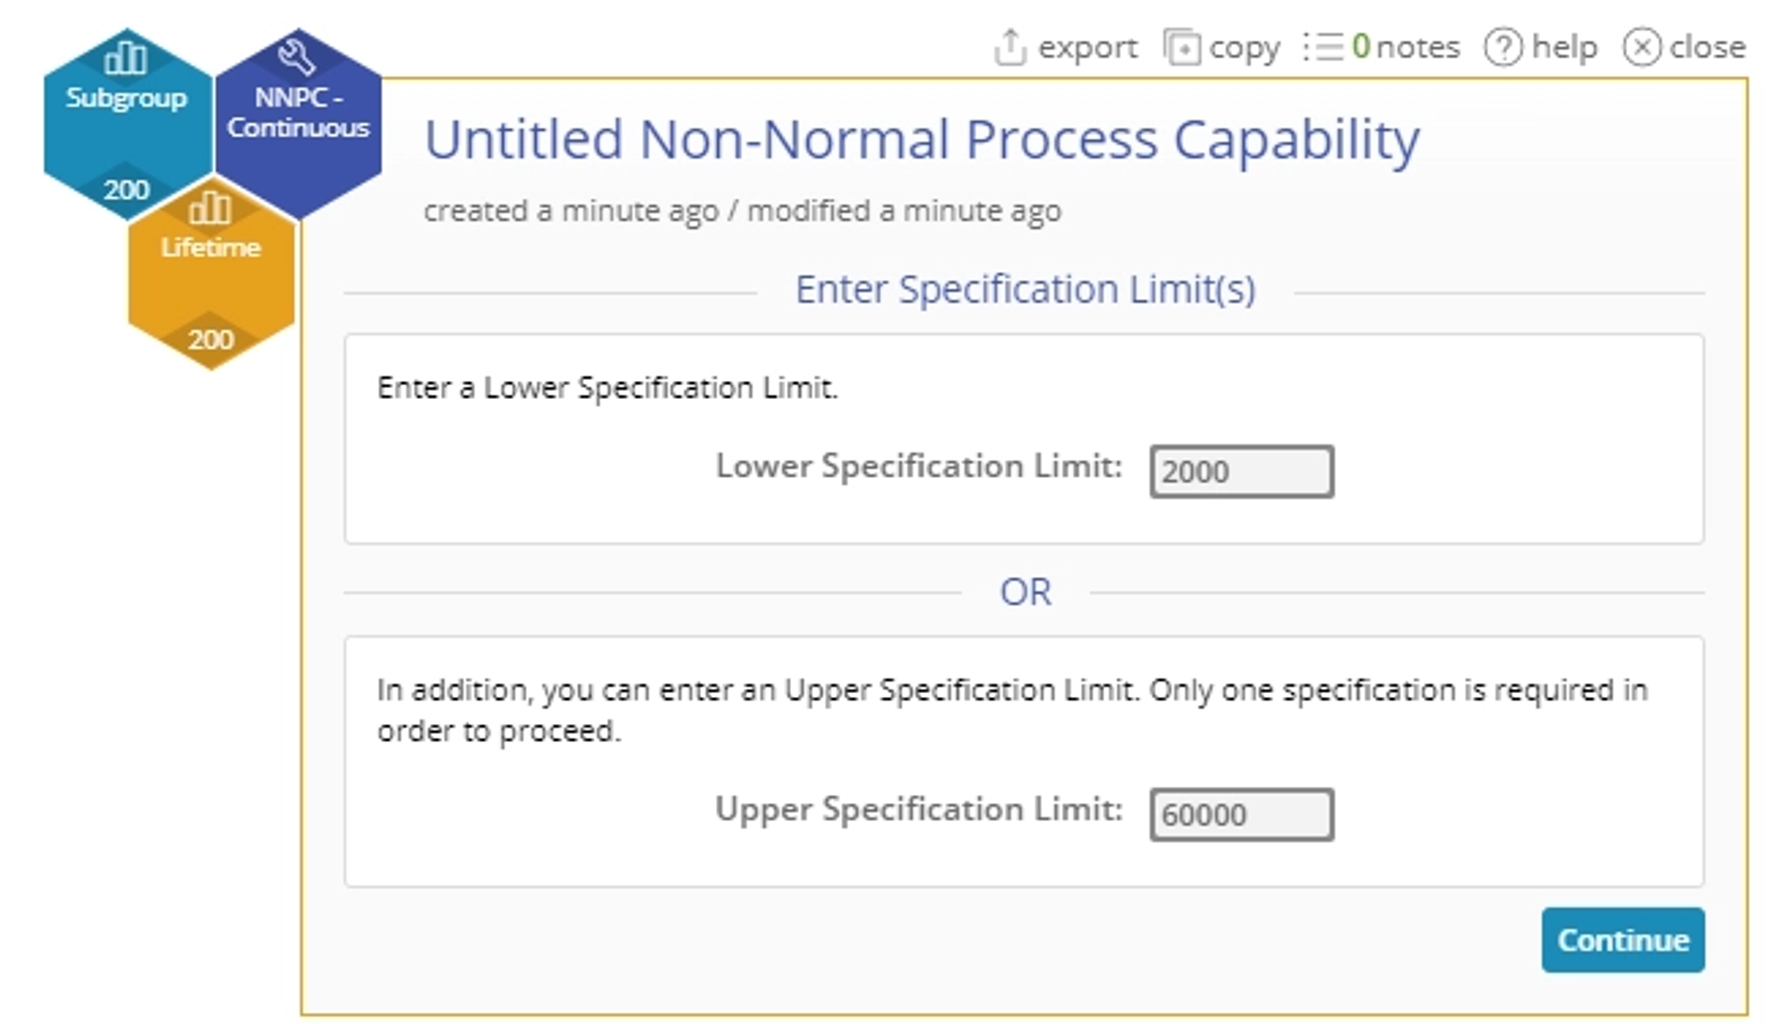 Non normal process capabilities with specification limits 2000 and 6000.